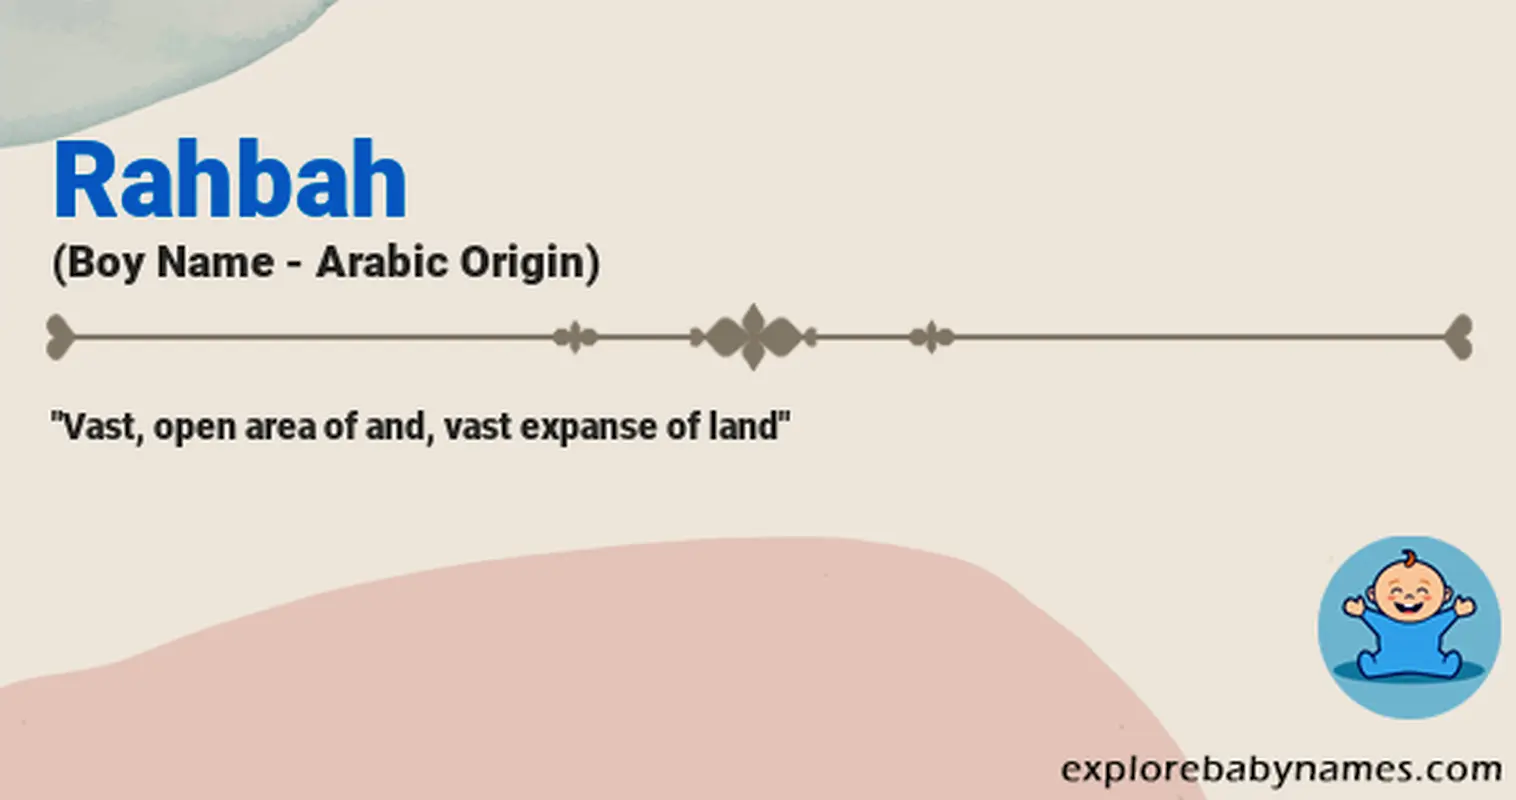 Meaning of Rahbah